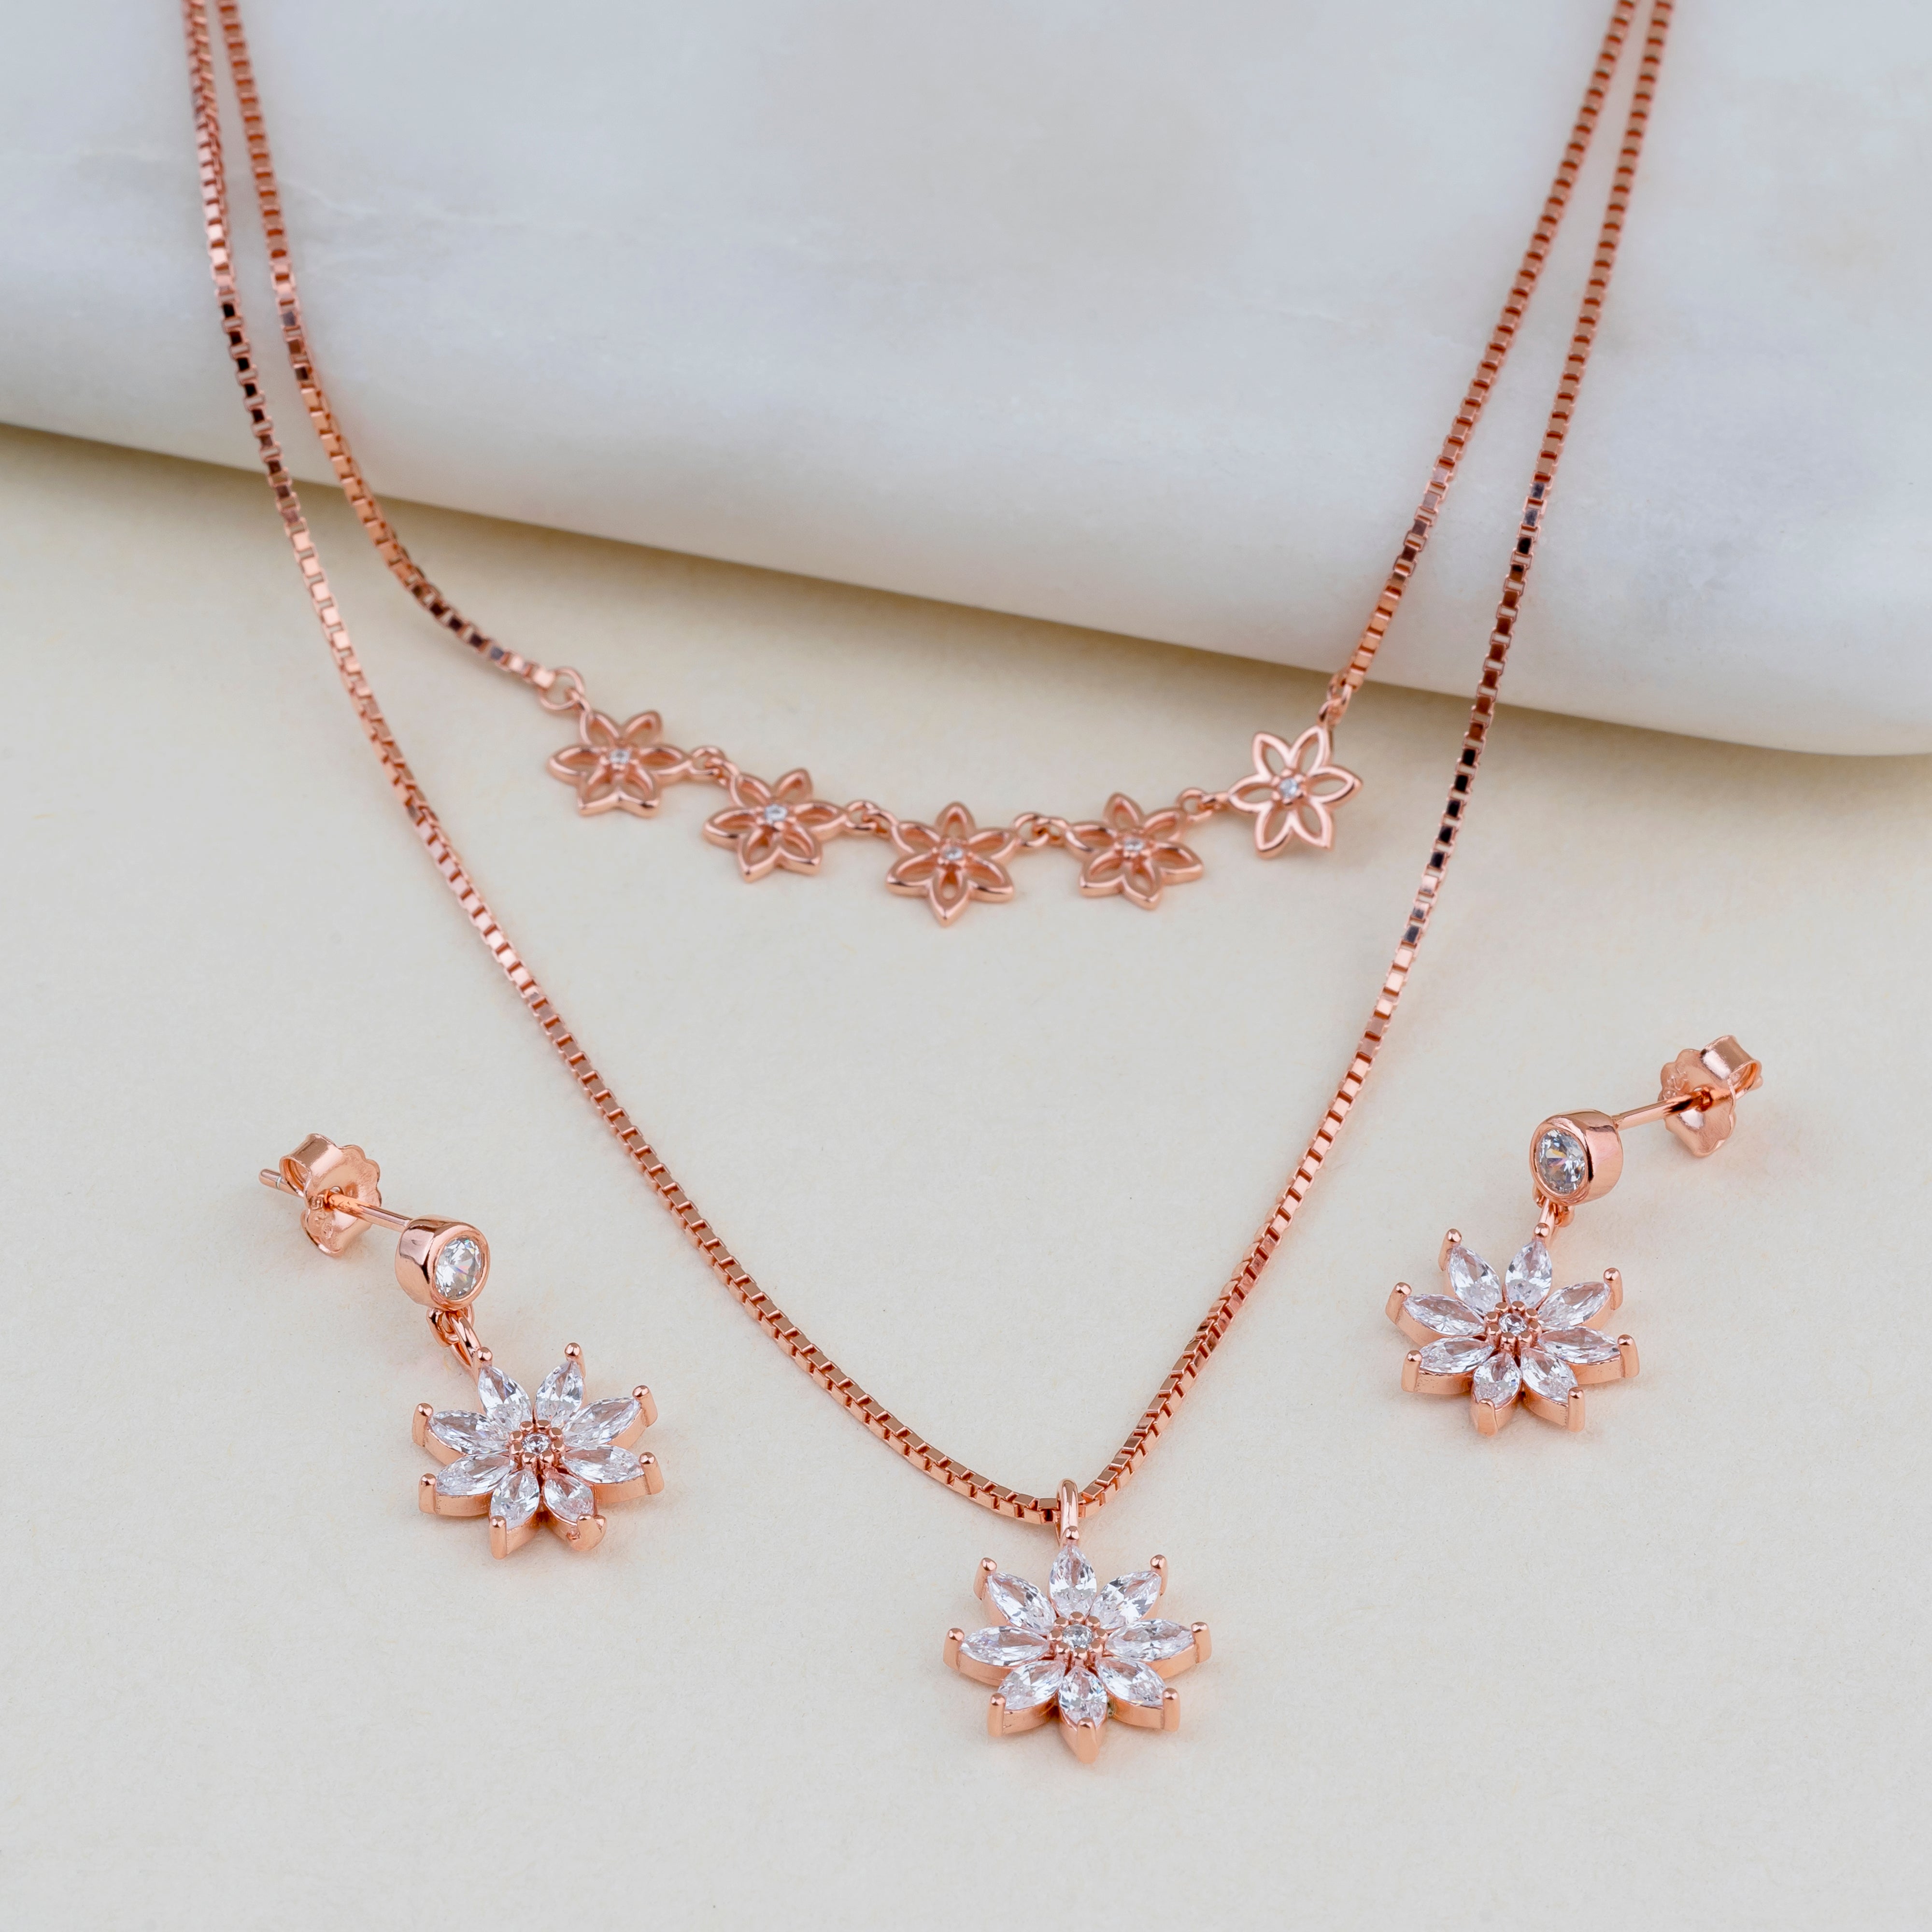 Flower Rose Gold Stainless Steel Necklace Pendant Chain Women – ZIVOM